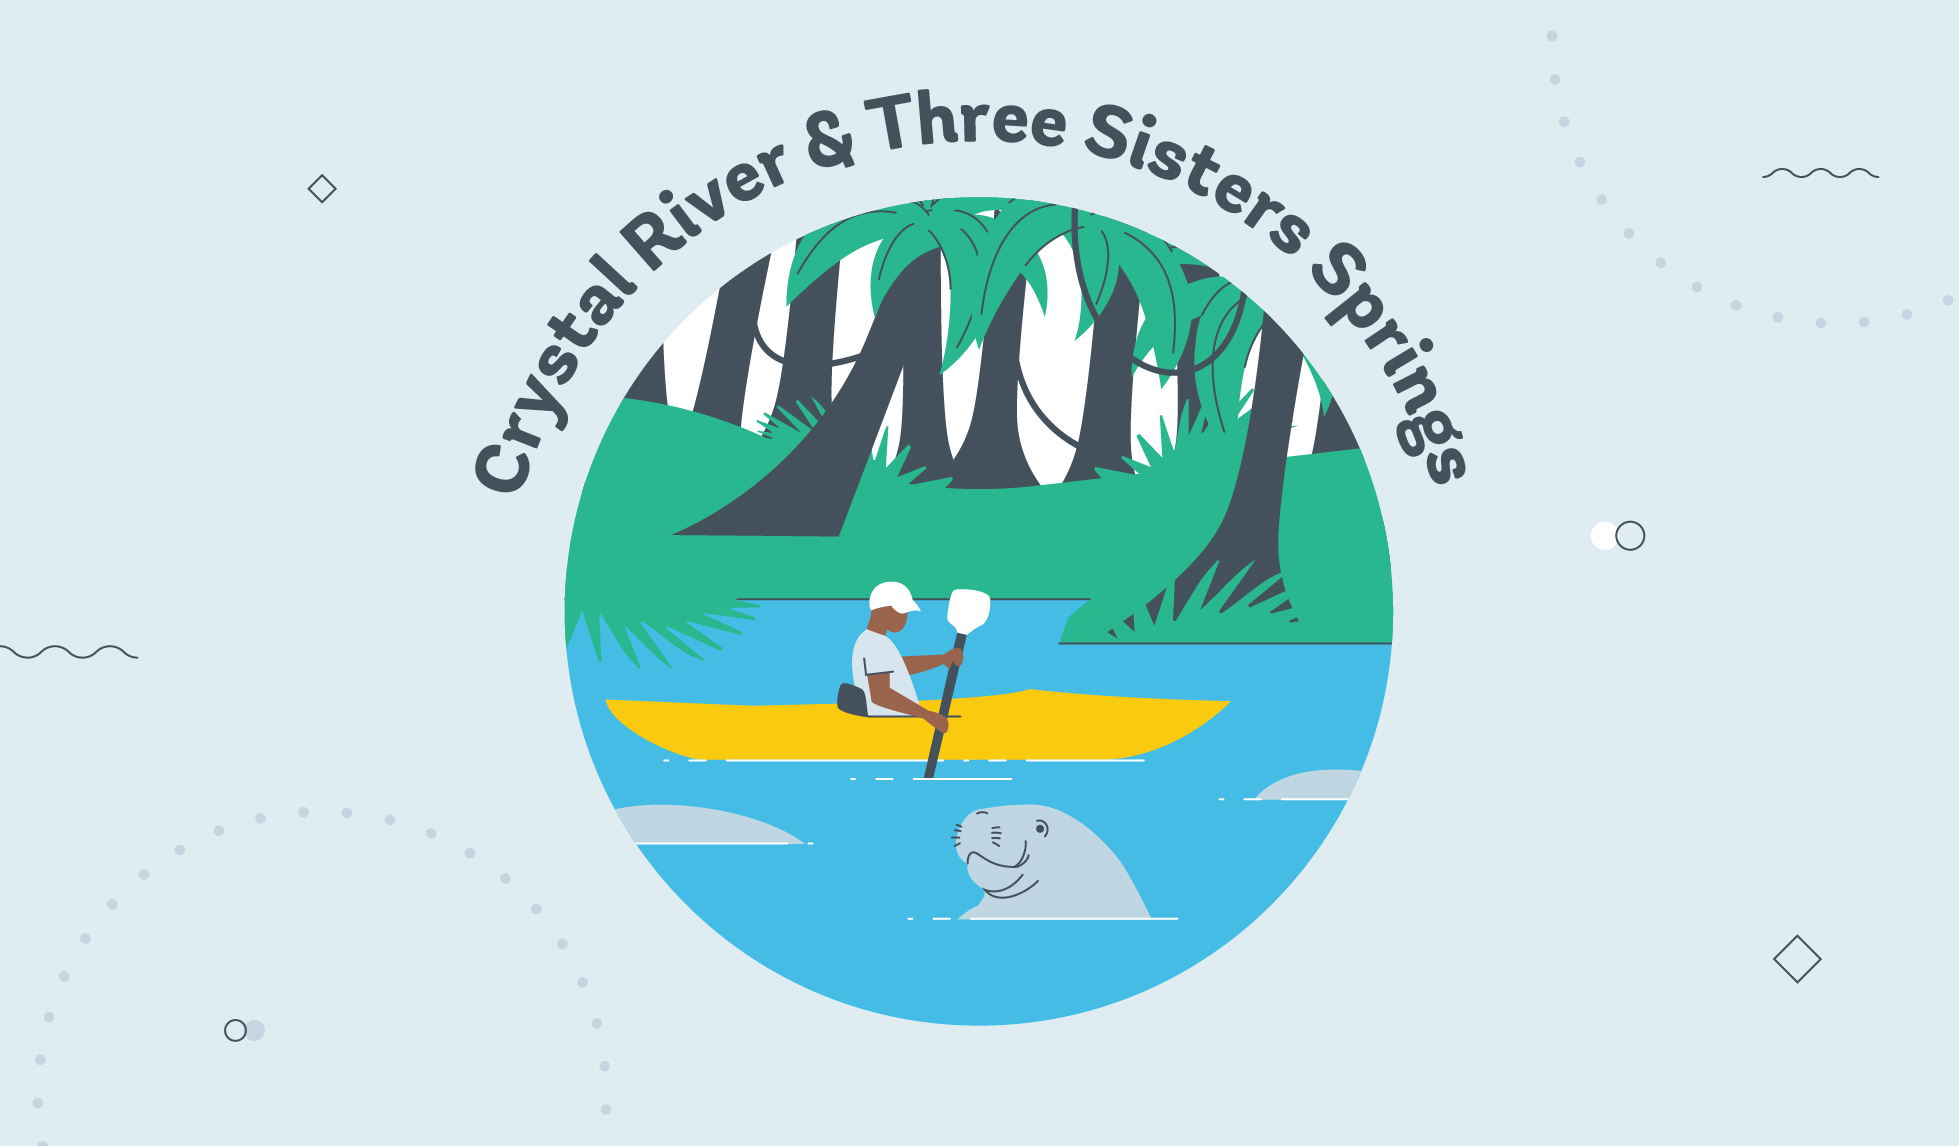 Crystal River & Three Sisters Springs graphic